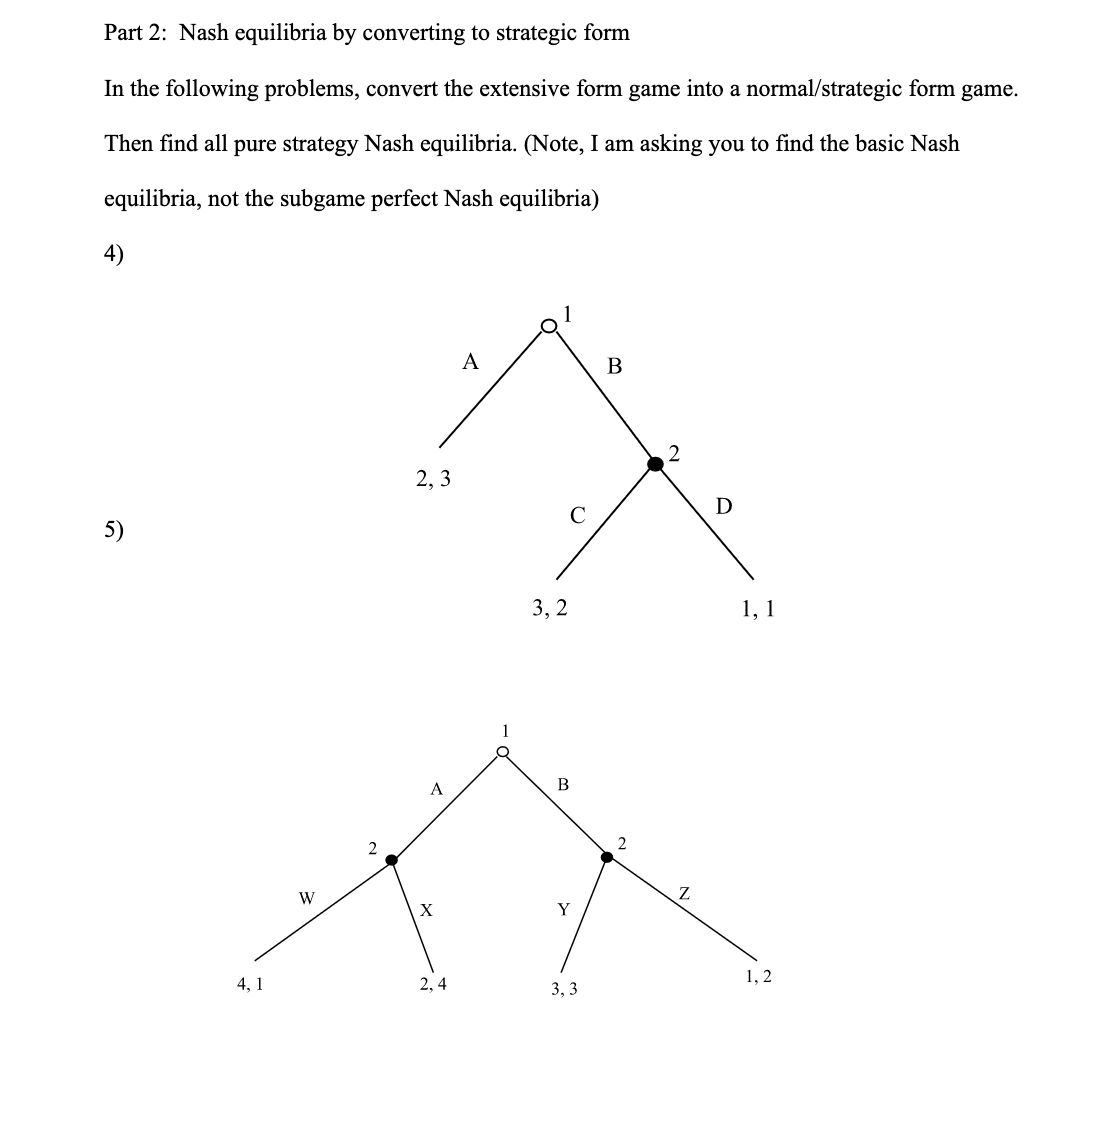 Part 2: Nash equilibria by converting to strategic form
In the following problems, convert the extensive form game into a normal/strategic form game.
Then find all pure strategy Nash equilibria. (Note, I am asking you to find the basic Nash
equilibria, not the subgame perfect Nash equilibria)
5)
4,1
W
2
2,3
A
X
2,4
A
3,2
B
Q
Y
3,3
B
2
2
D
1, 1
1,2